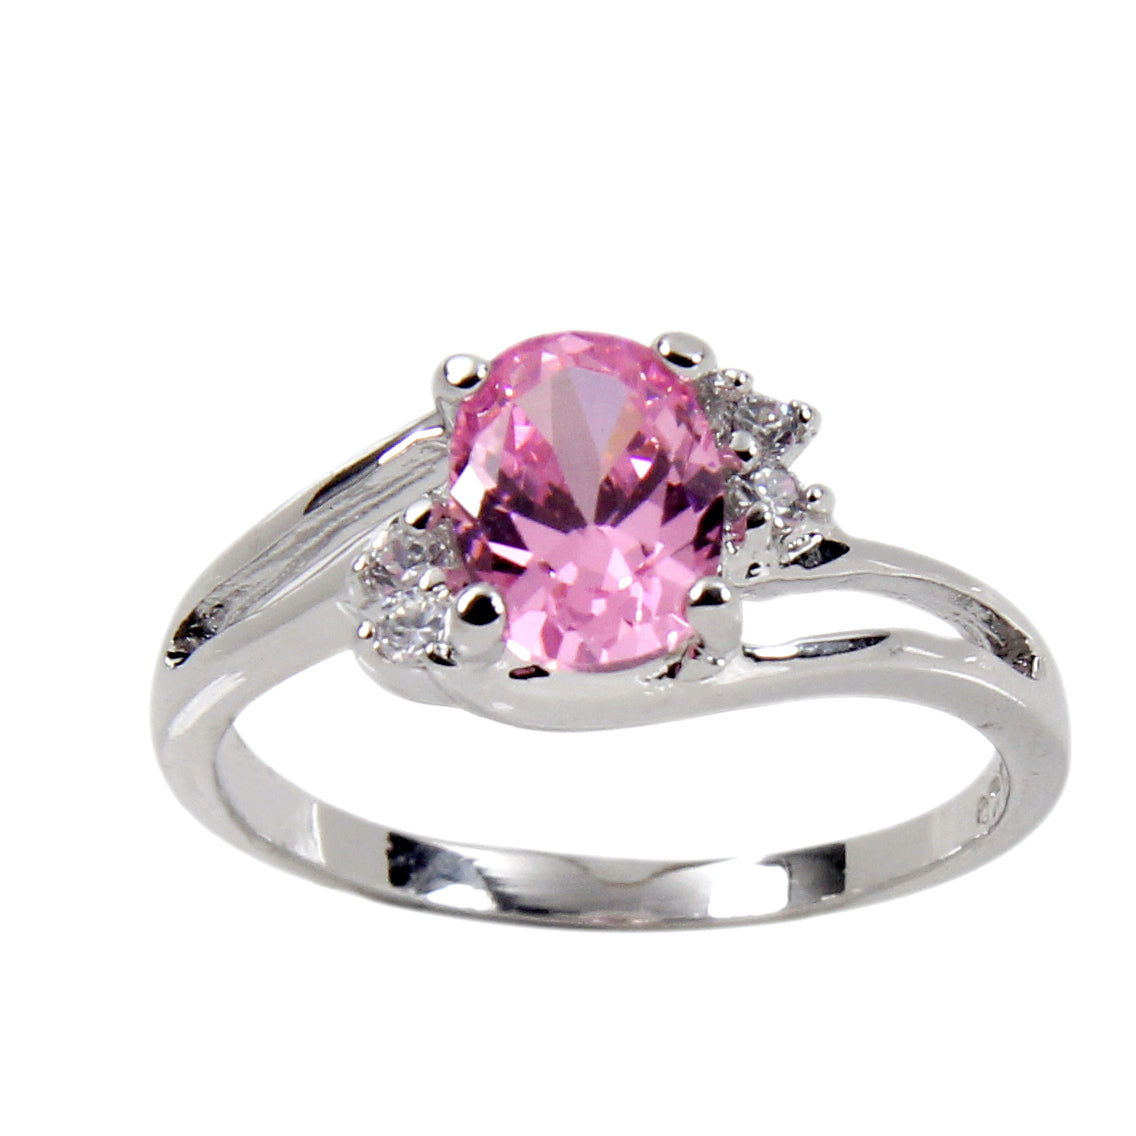 Offset Twist Sterling Silver Oval Pink Stone Ring